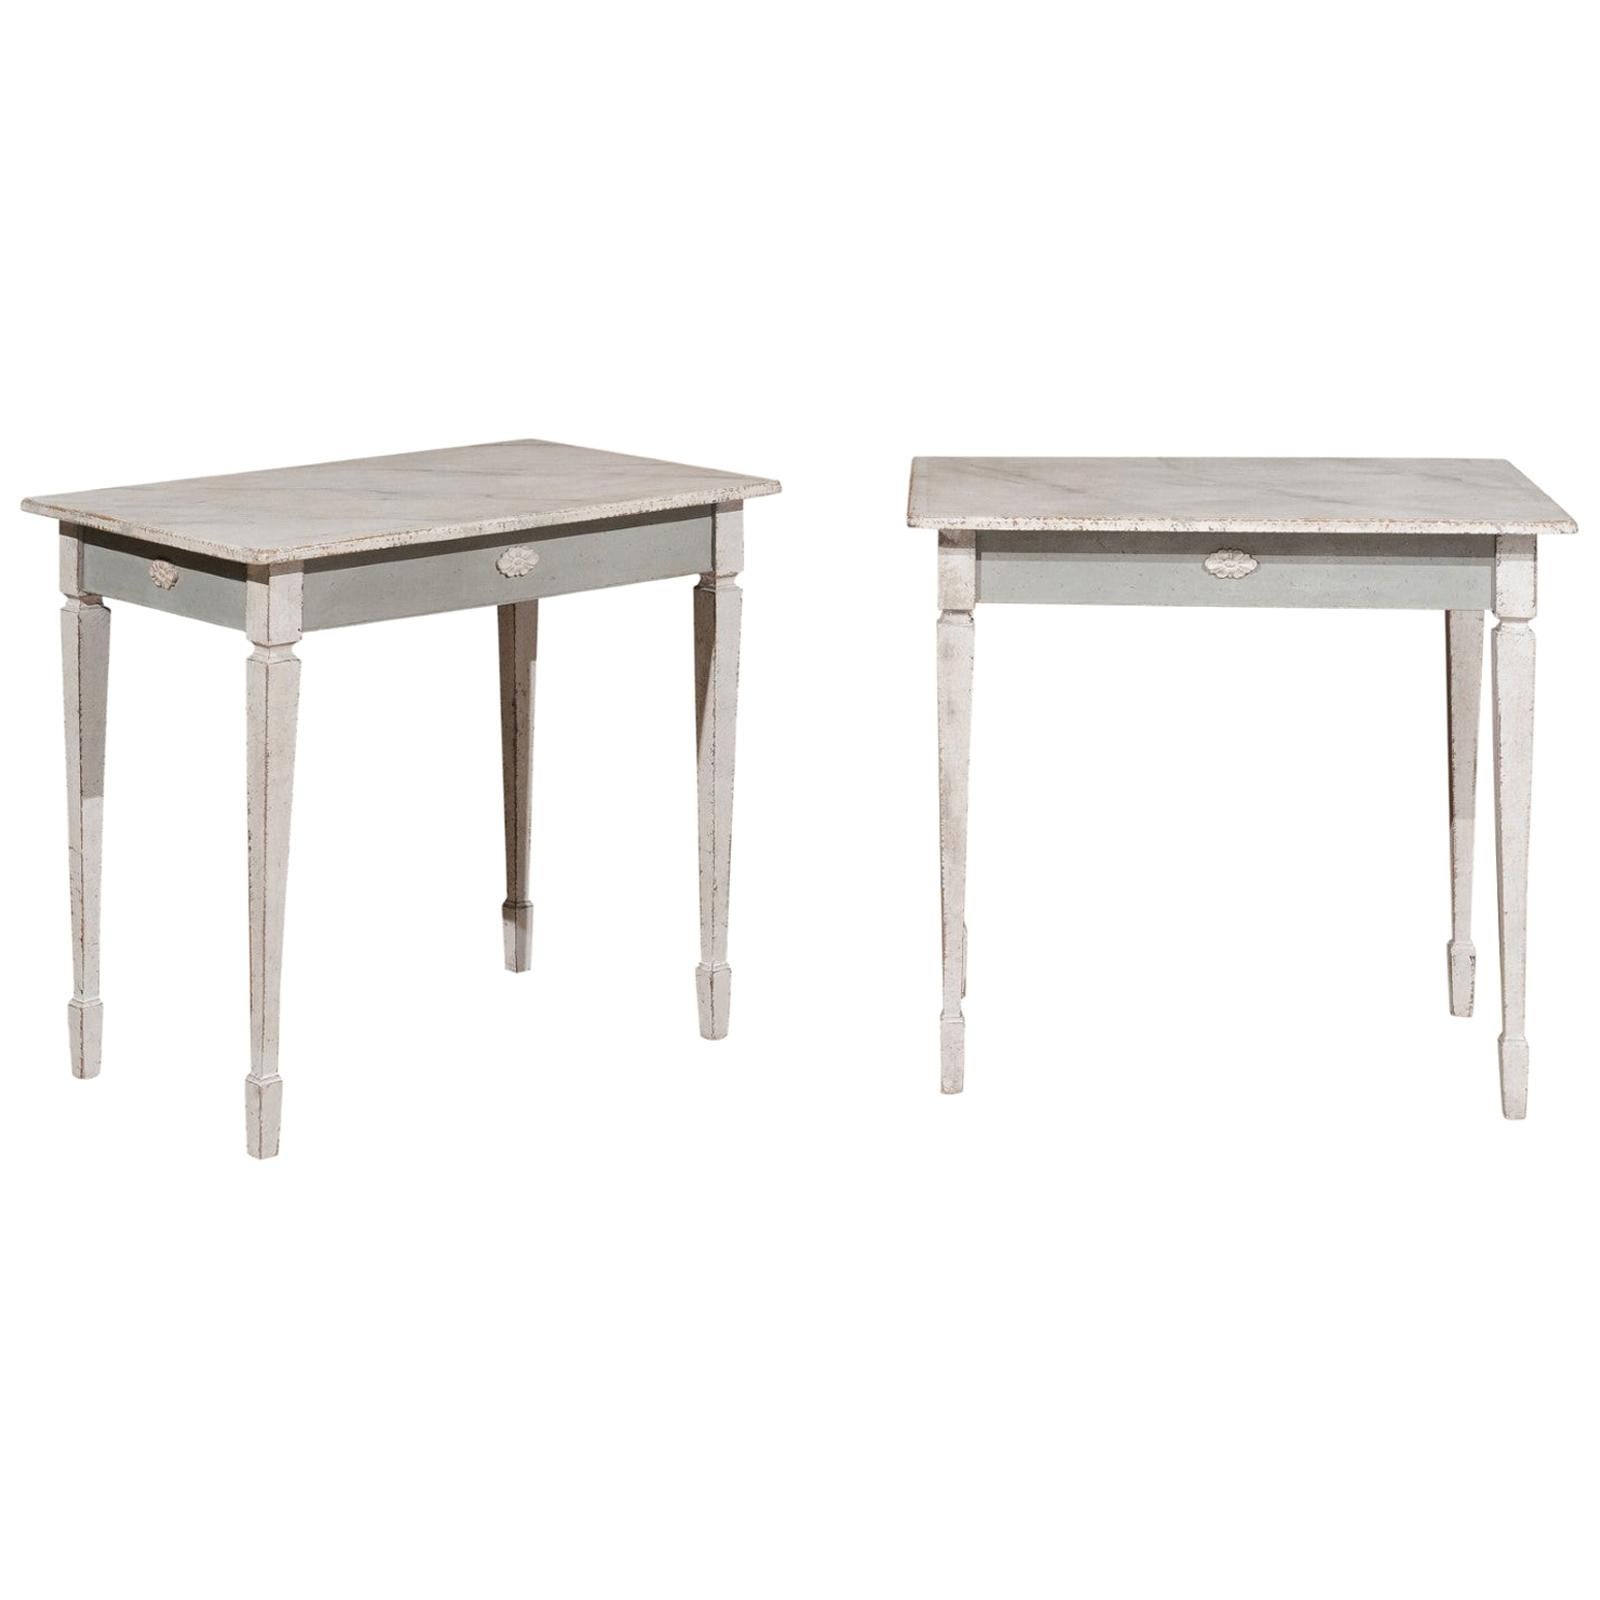 Pair of Swedish Gustavian Style Painted Low Side Tables with Marbleized Tops